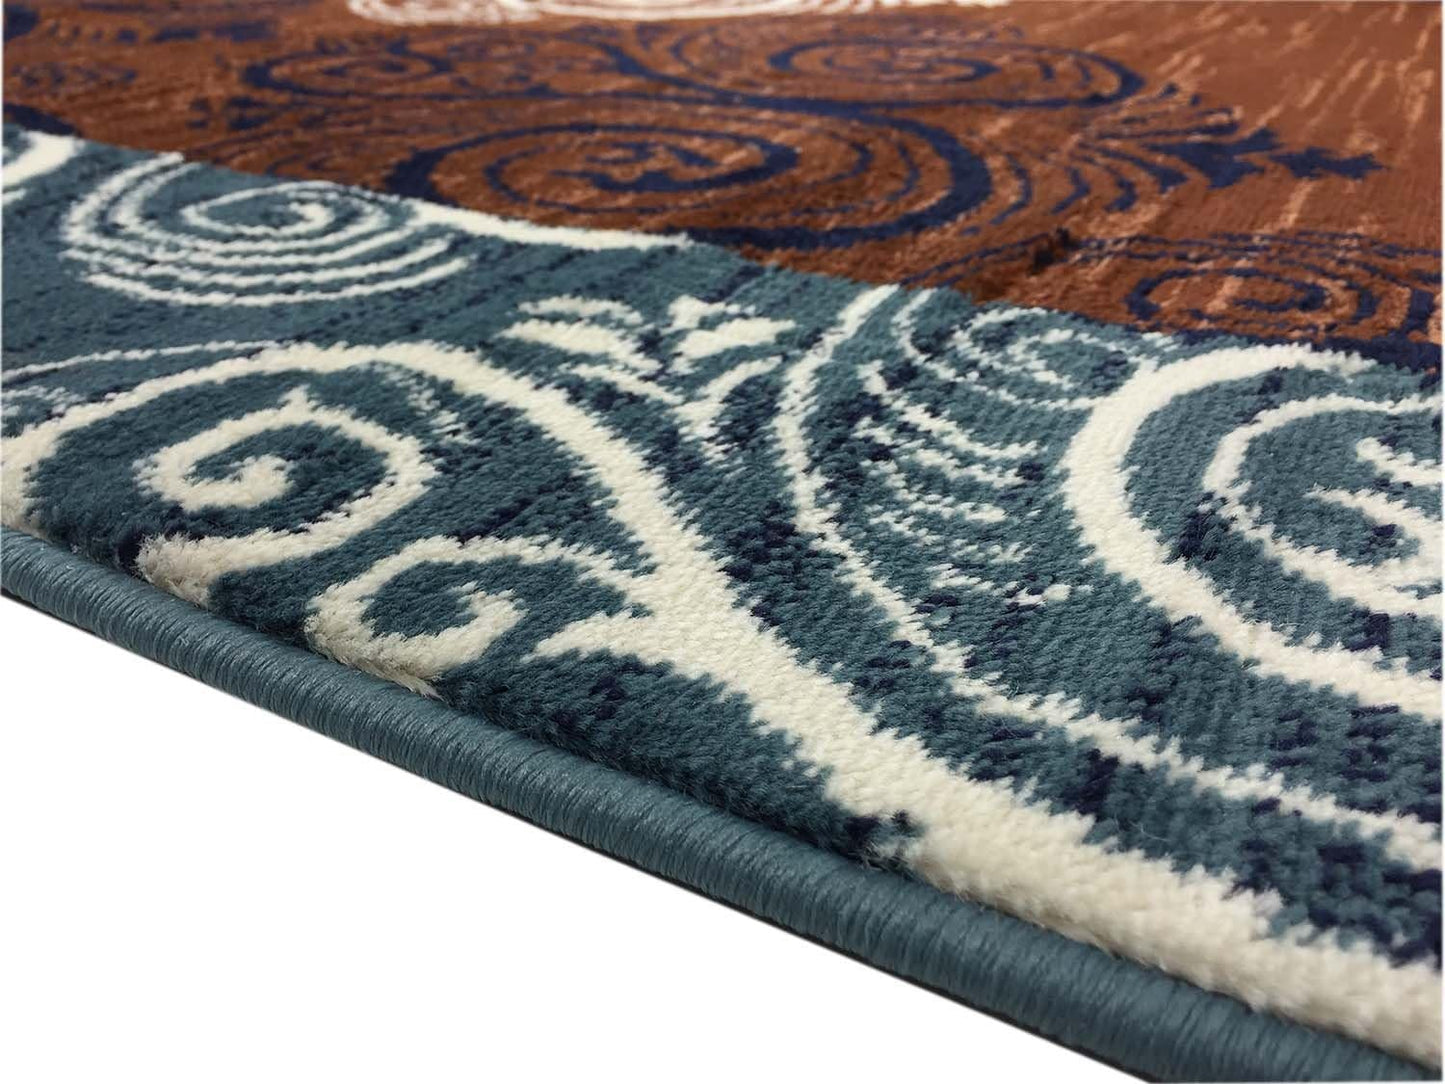 Studio Collection Damask Abstract Design Area Rug Rugs (Damask Teal Blue Brown, 5x7)